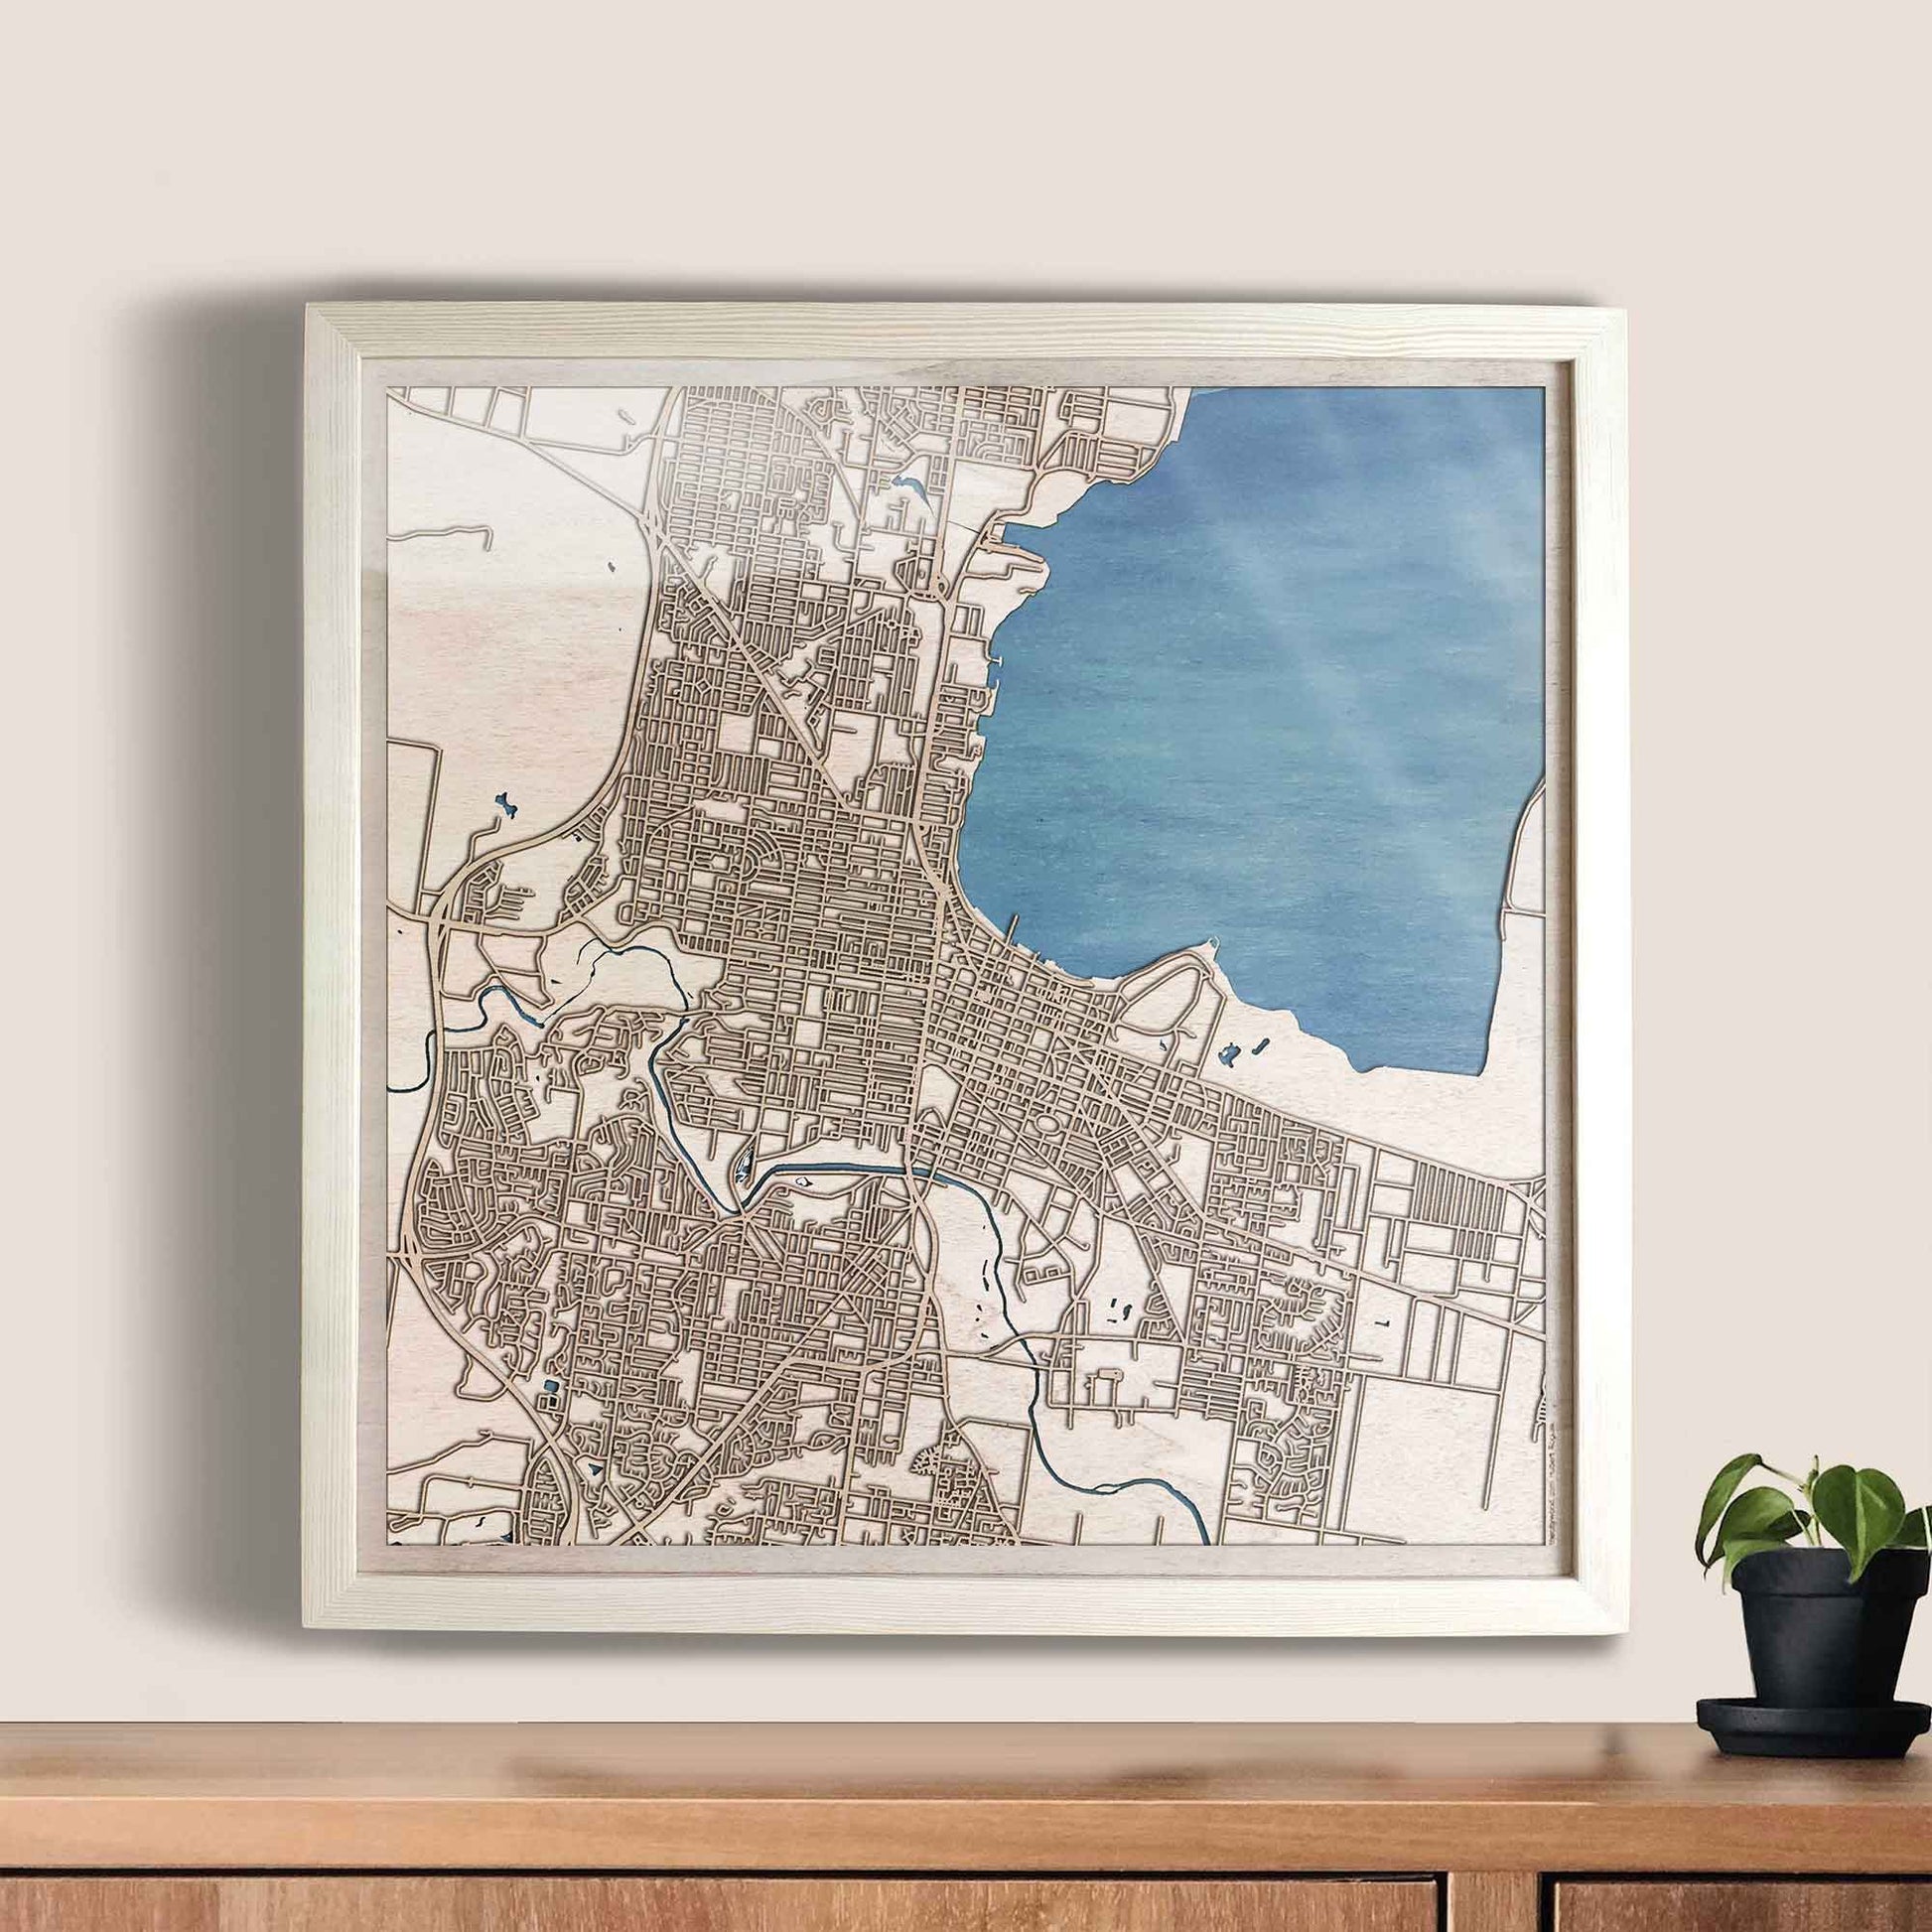 Geelong Wooden Map by CityWood - Custom Wood Map Art - Unique Laser Cut Engraved - Anniversary Gift